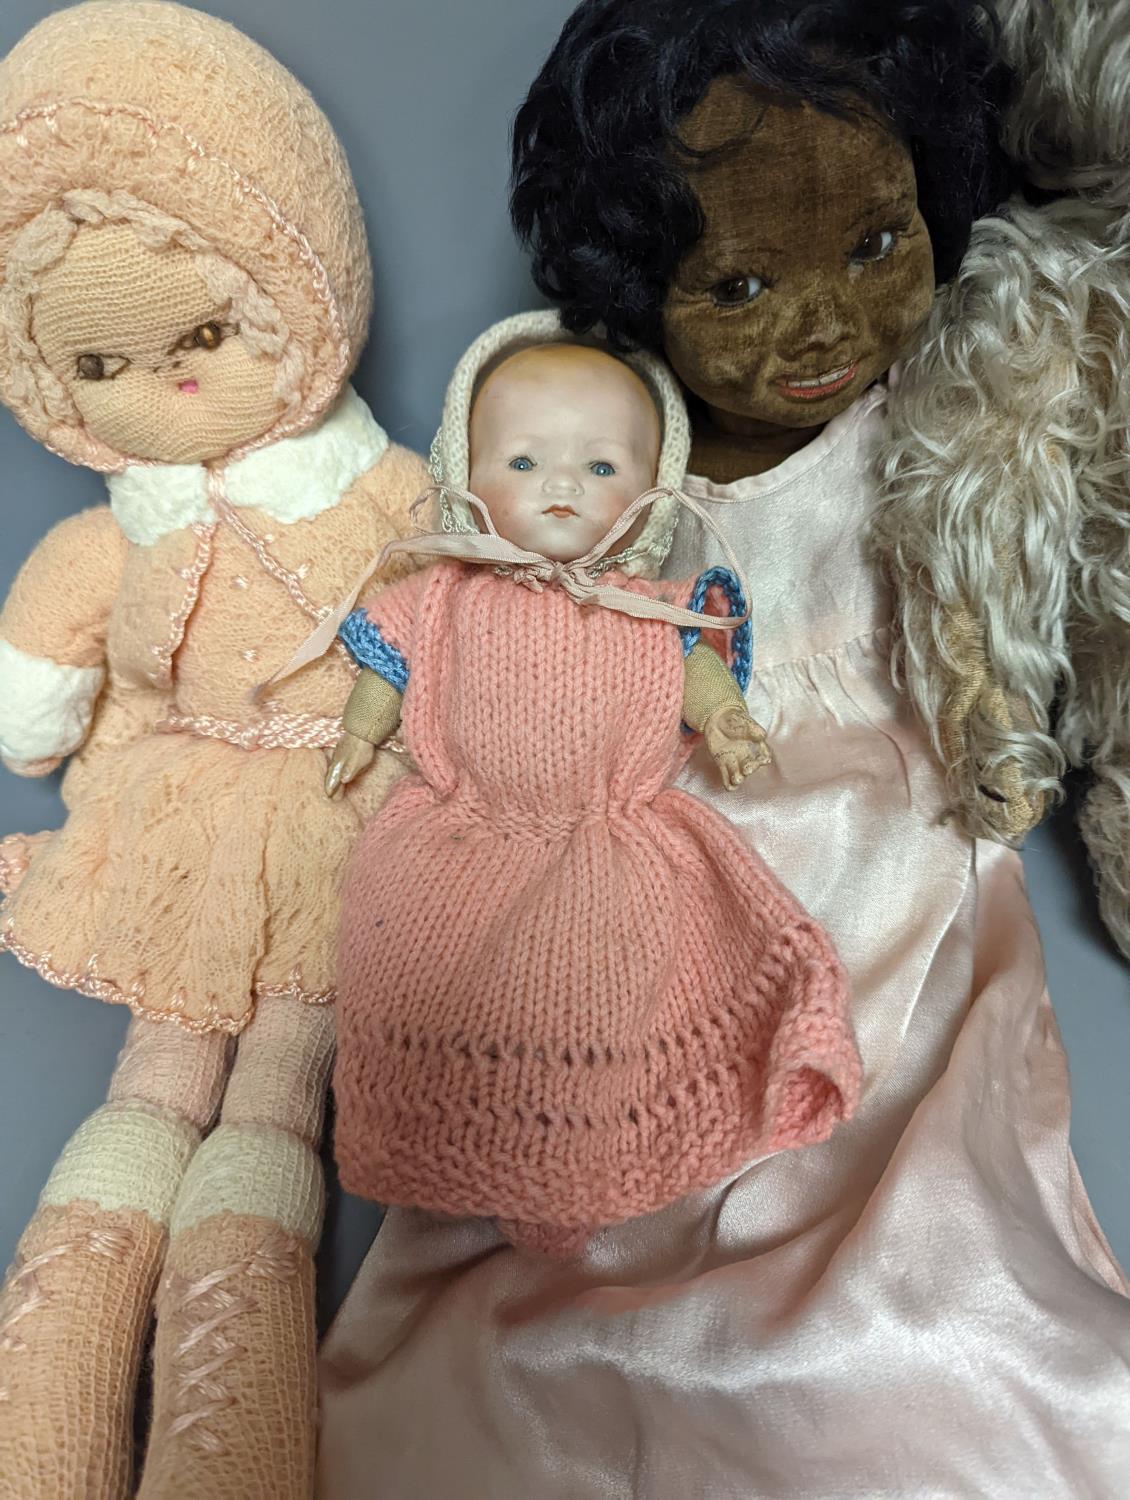 A Nora Wellings type mulatto doll and an Armmand Marseille doll 341, teddy etc, mulatto doll 43cms - Image 3 of 5